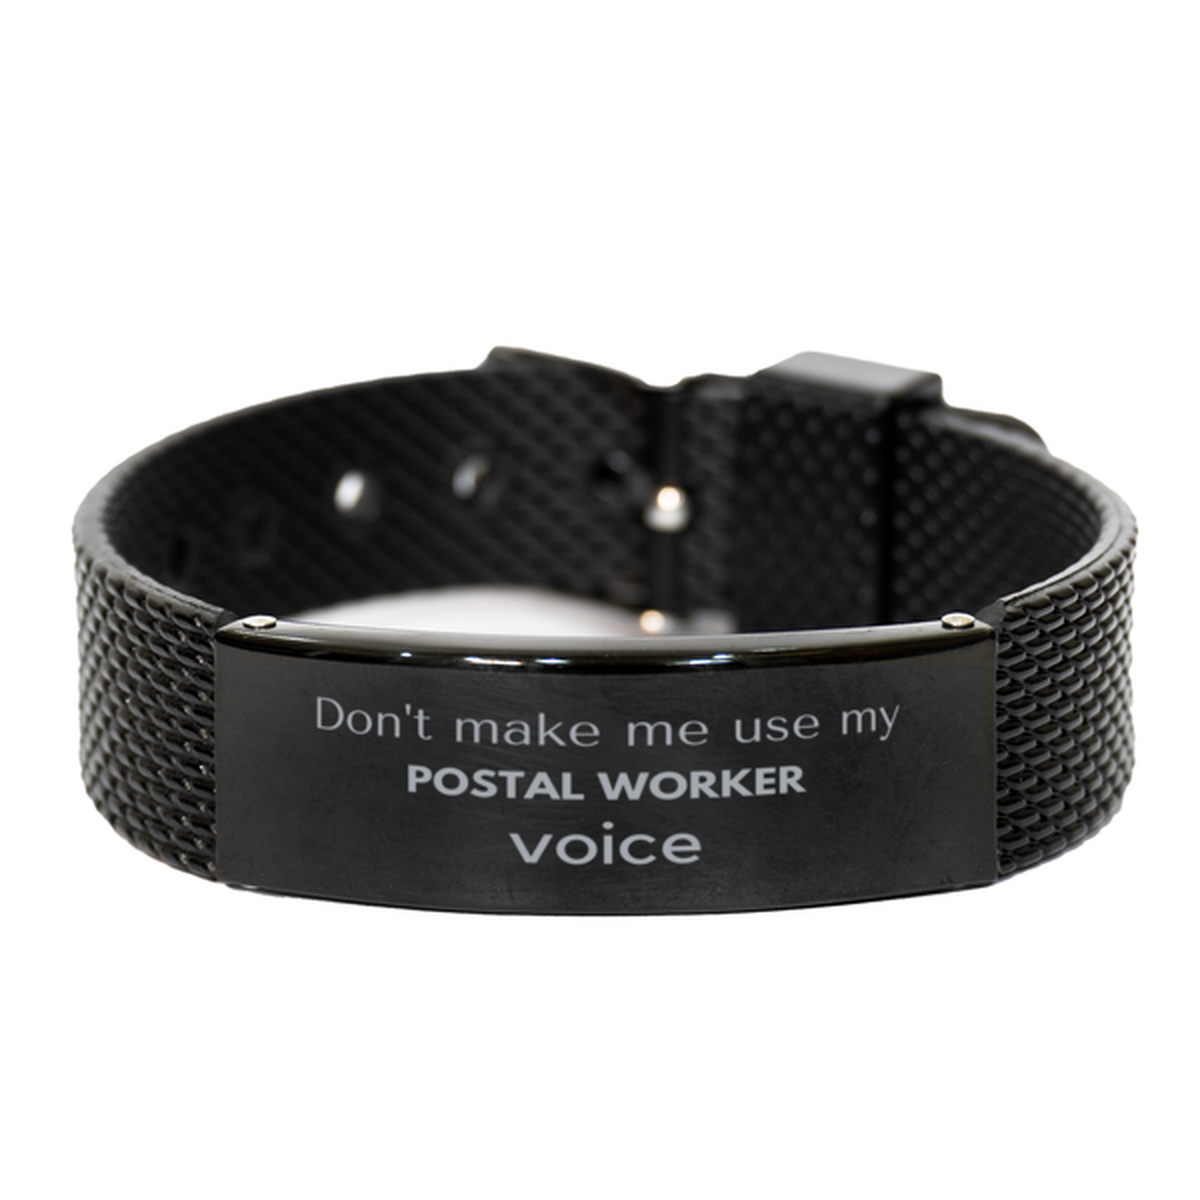 Don't make me use my Postal Worker voice, Sarcasm Postal Worker Gifts, Christmas Postal Worker Black Shark Mesh Bracelet Birthday Unique Gifts For Postal Worker Coworkers, Men, Women, Colleague, Friends